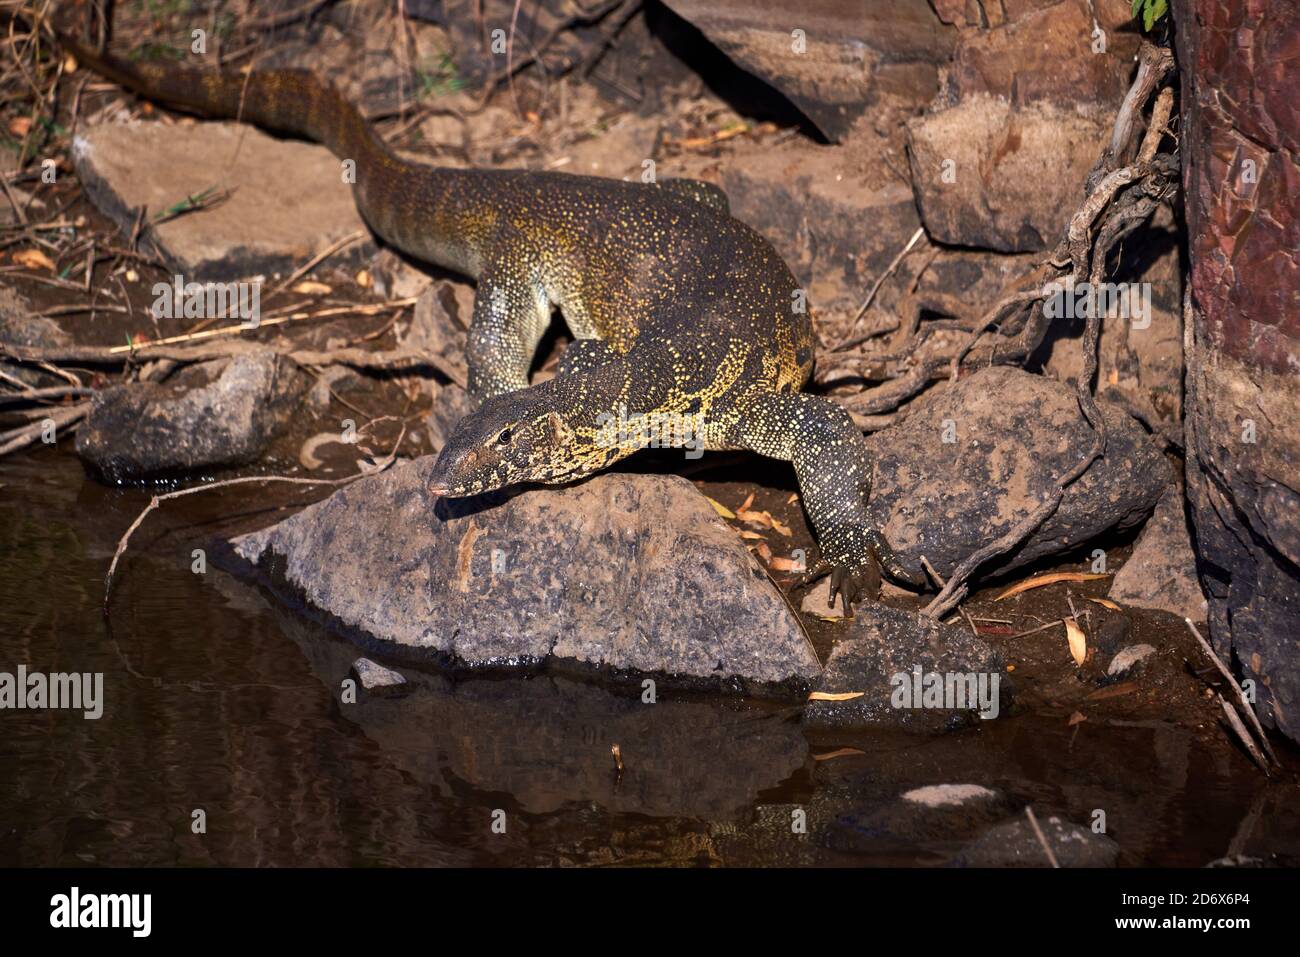 Nile monitor (Varanus niloticus) on a river bank sticking its tongue out Stock Photo